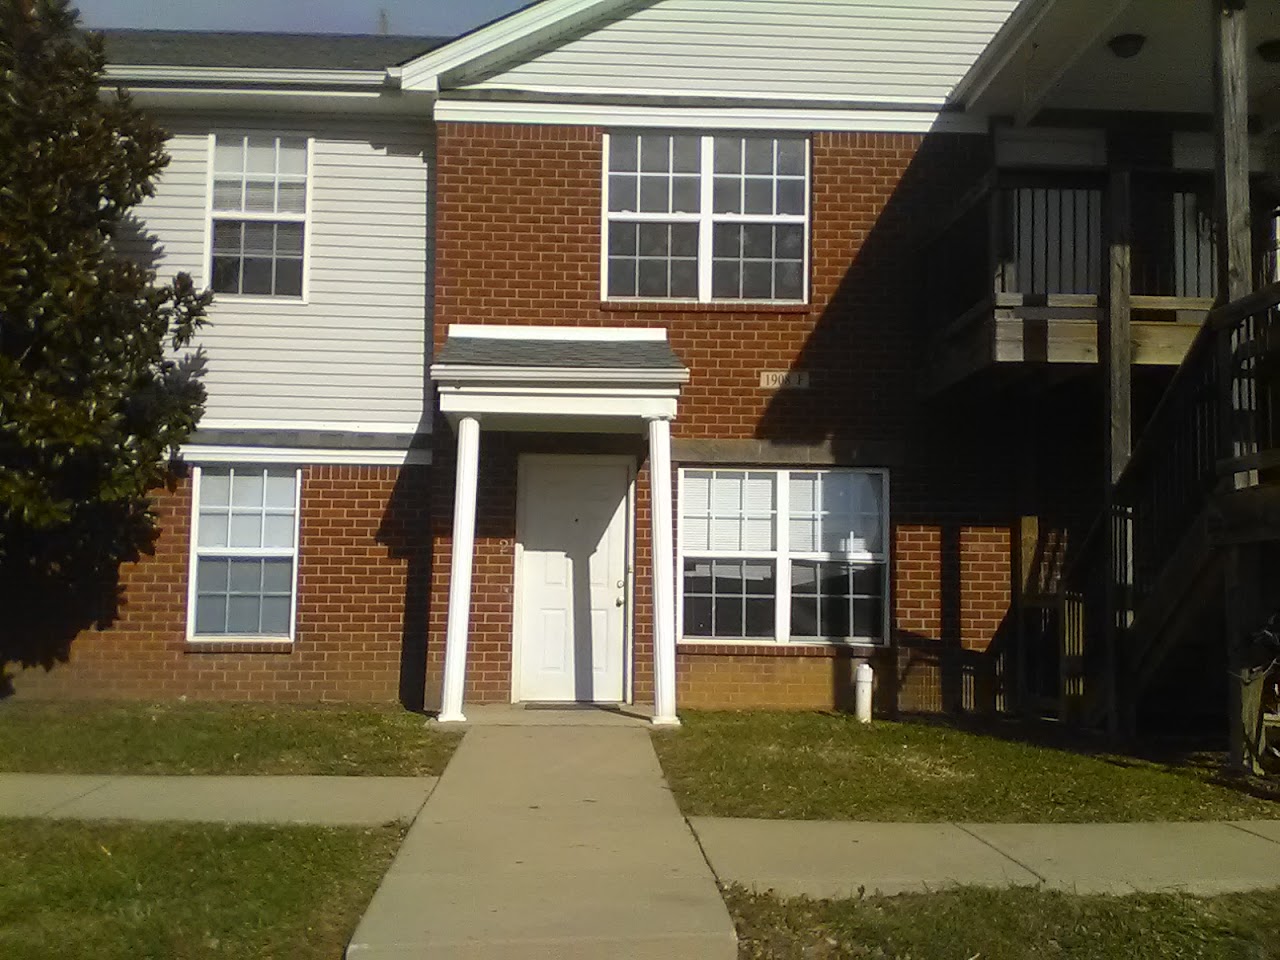 Photo of CHILEWICH APARTMENTS. Affordable housing located at JERICHO ROAD LAGRANGE, KY 40031